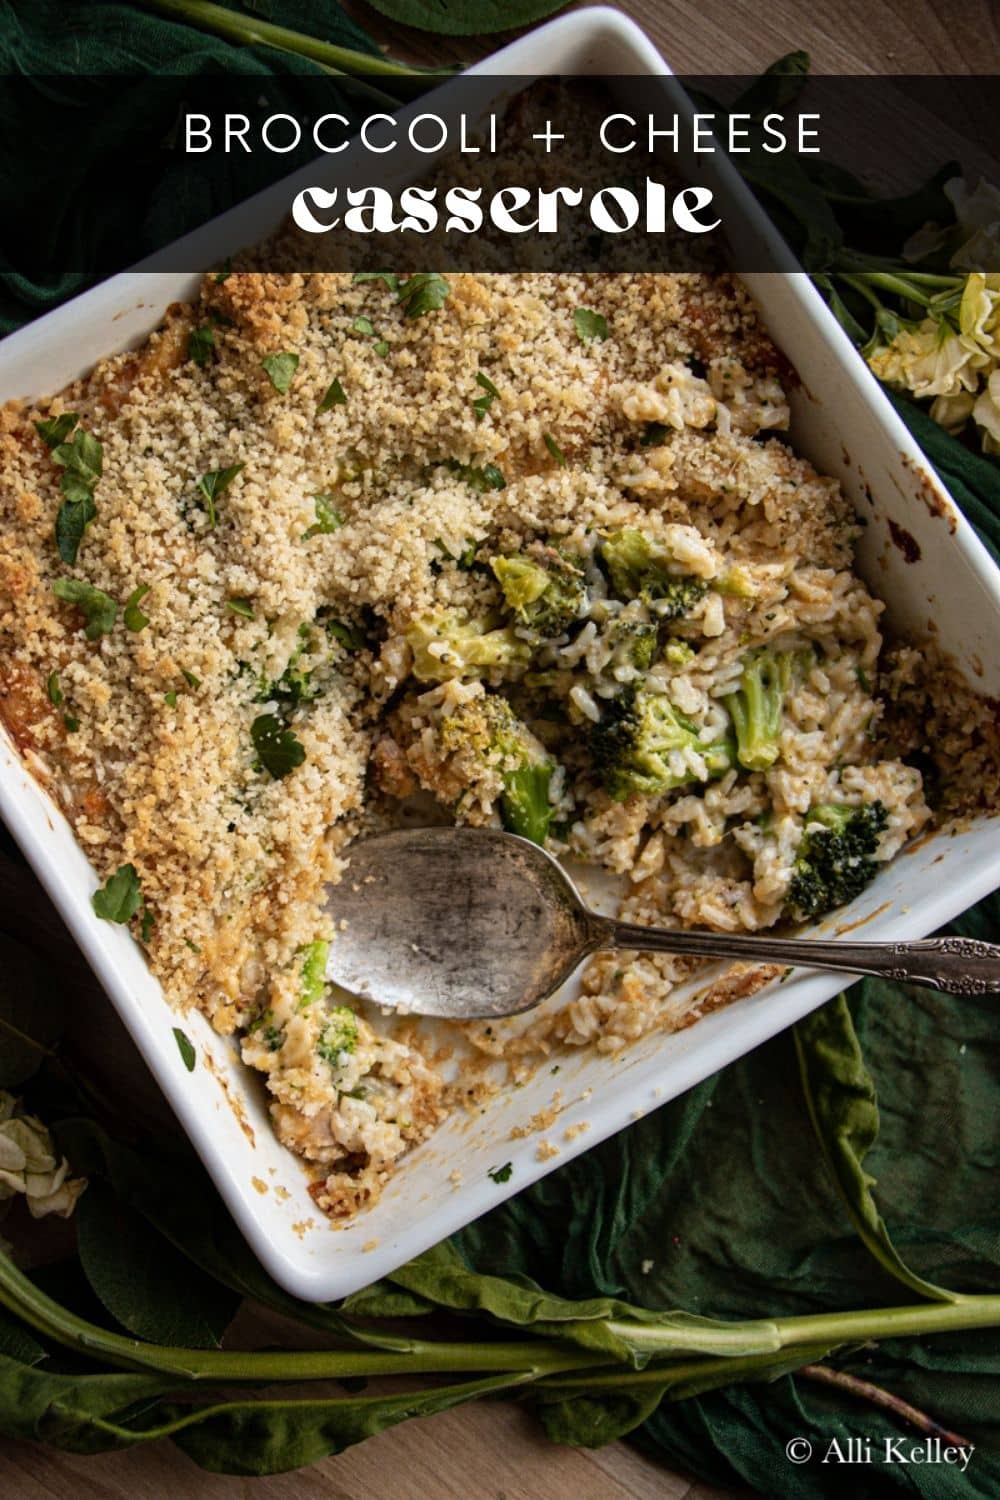 Broccoli rice casserole is a simple and delicious meal that'll be a hit in any household! Bursting with flavor from the garlic, cream of chicken soup, broccoli florets, and sharp cheddar cheese – this will be your new go-to family-friendly recipe. The best part? It's easy to make and cooks in just 40 minutes!